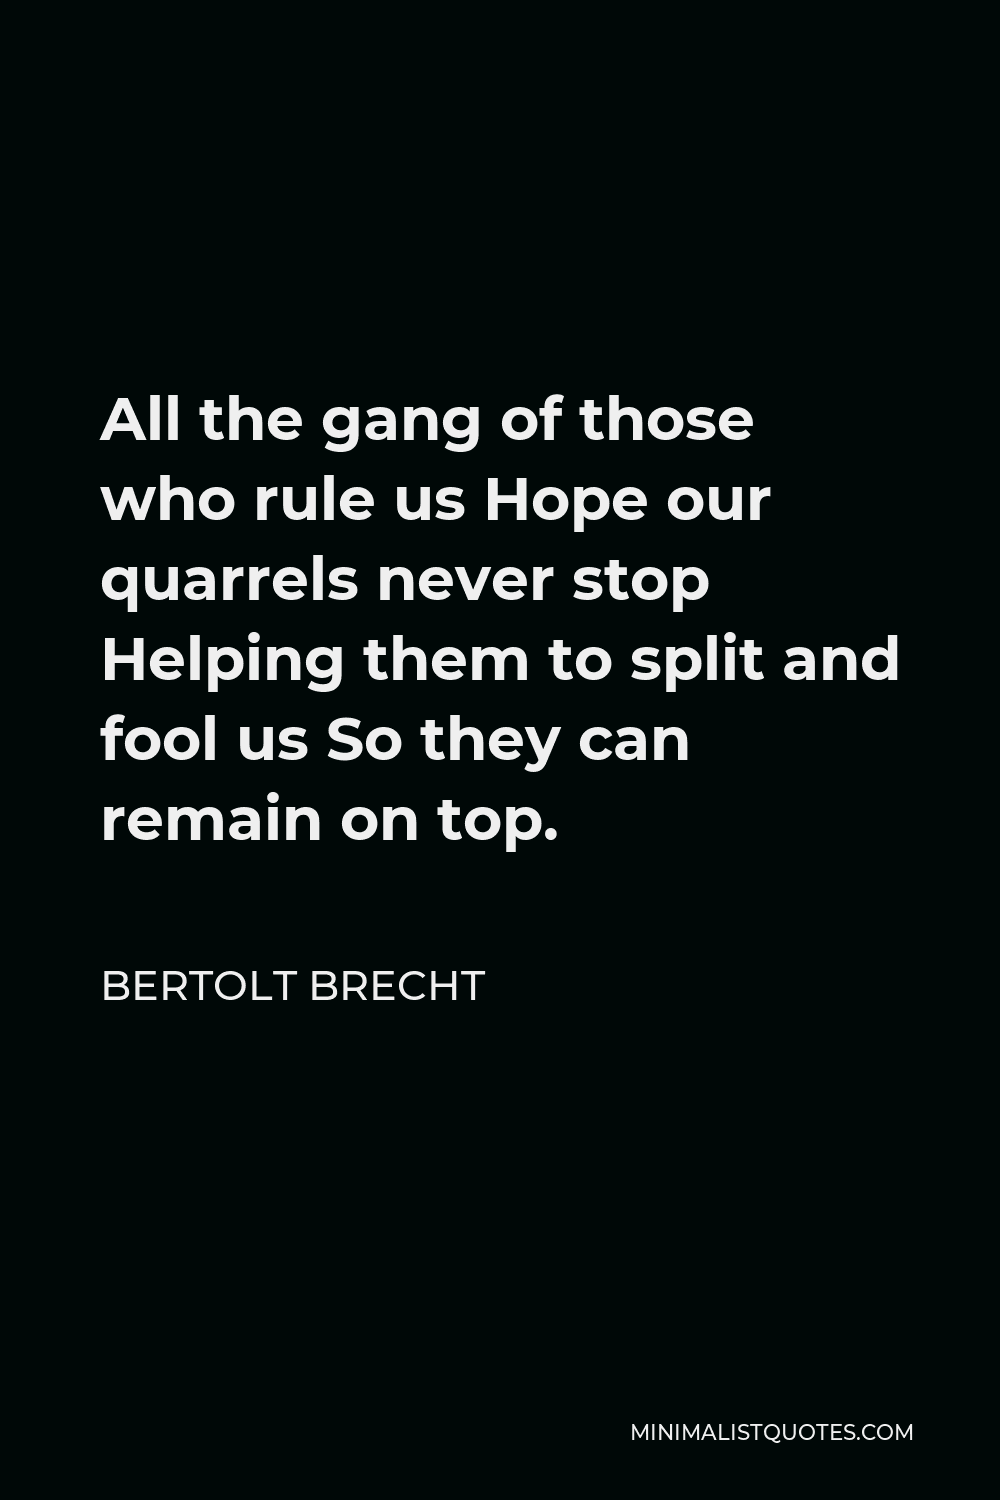 Bertolt Brecht Quote - All the gang of those who rule us Hope our quarrels never stop Helping them to split and fool us So they can remain on top.